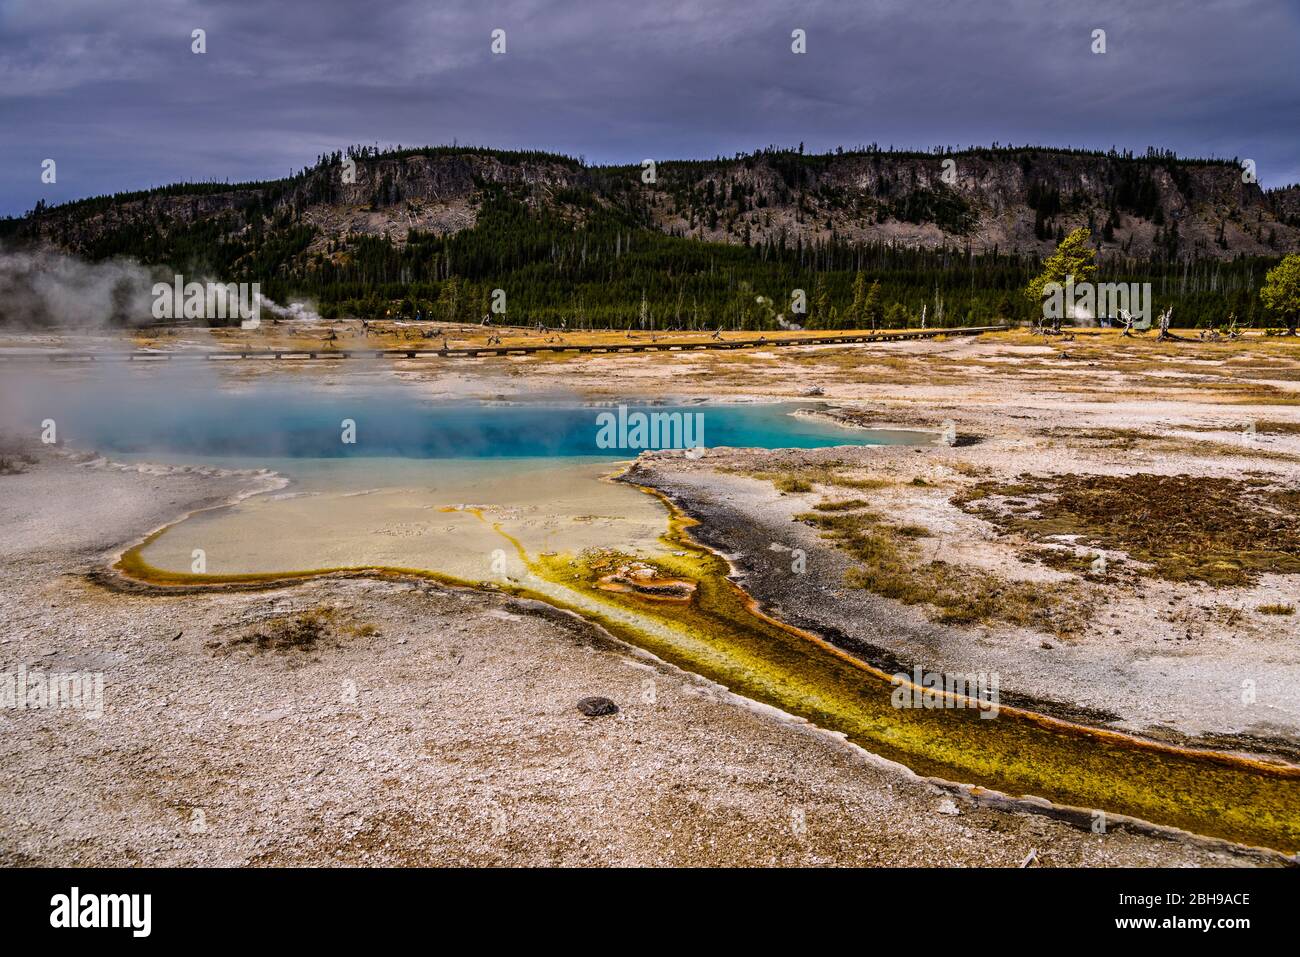 USA, Wyoming, Yellowstone National Park, Old Faithful, Upper Geyser Basin, Biscuit Basin, Sapphire Pool Stockfoto